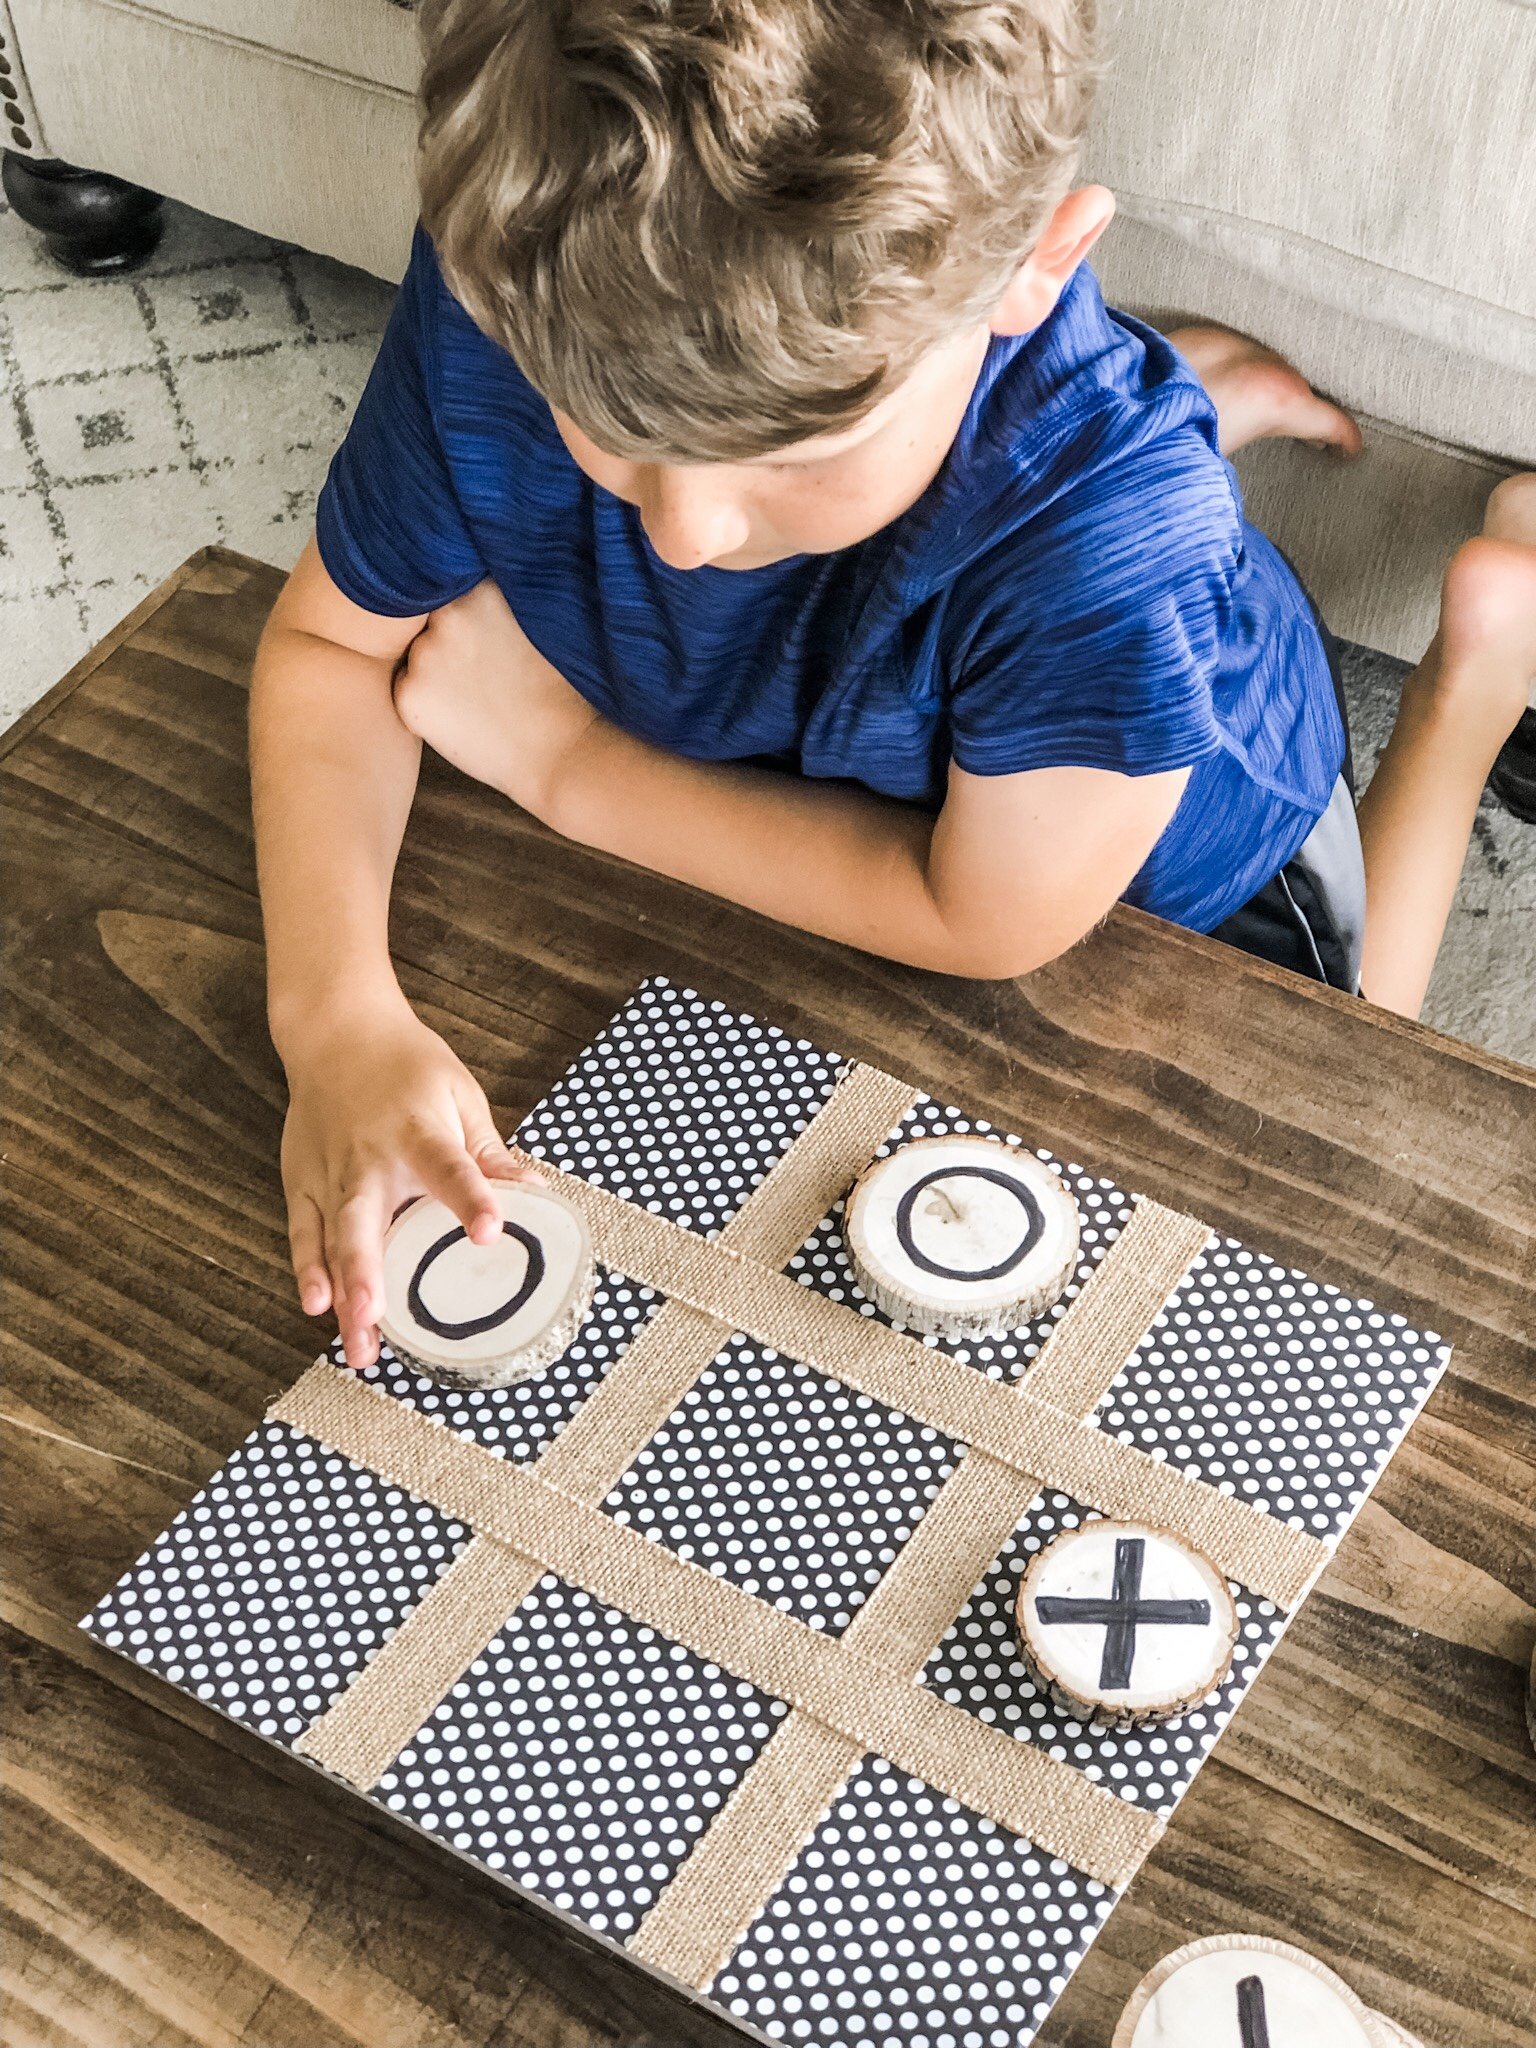 make your own tic tac toe game